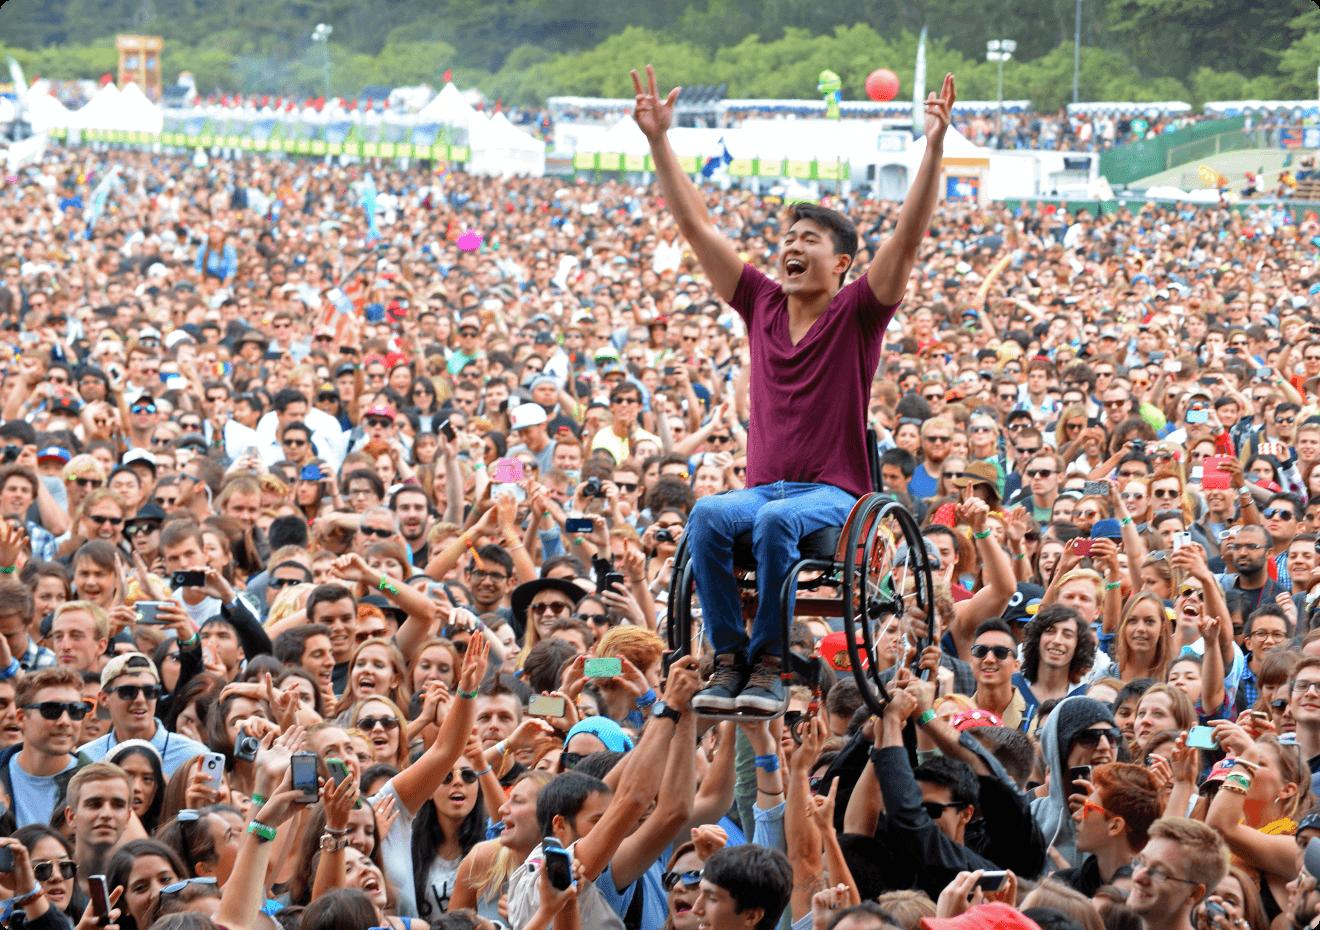 Accessible festival